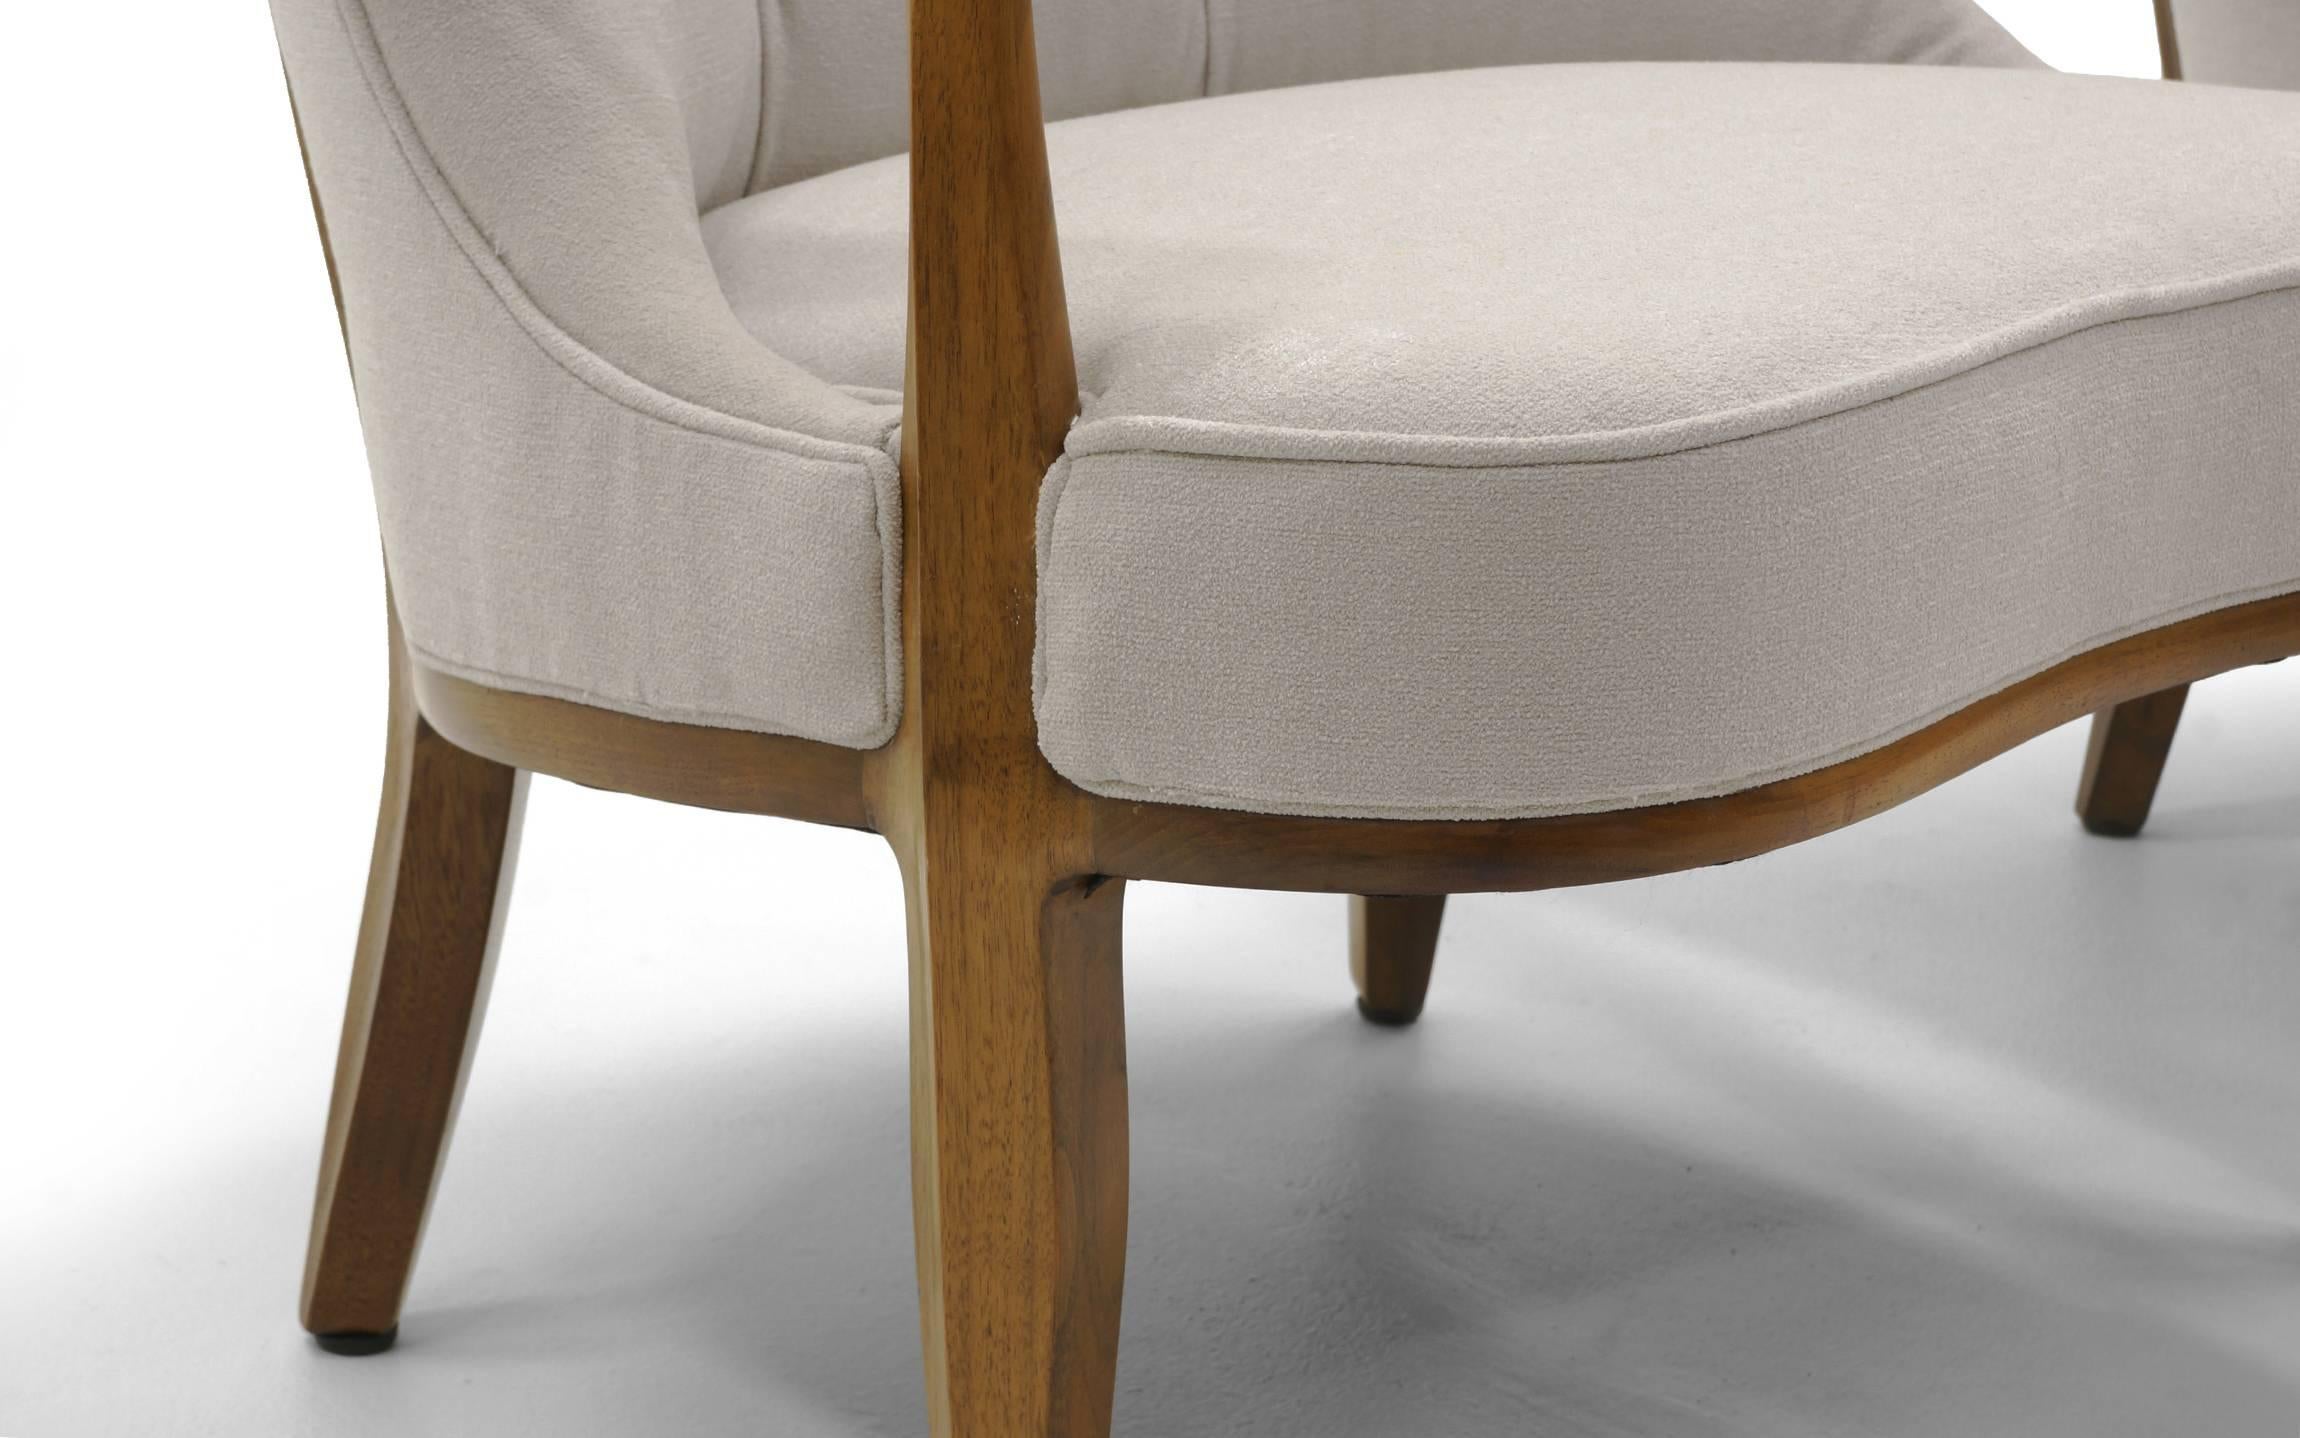 Pair of Janus Chairs by Edward Wormley for Dunbar, Beautifully Restored 2